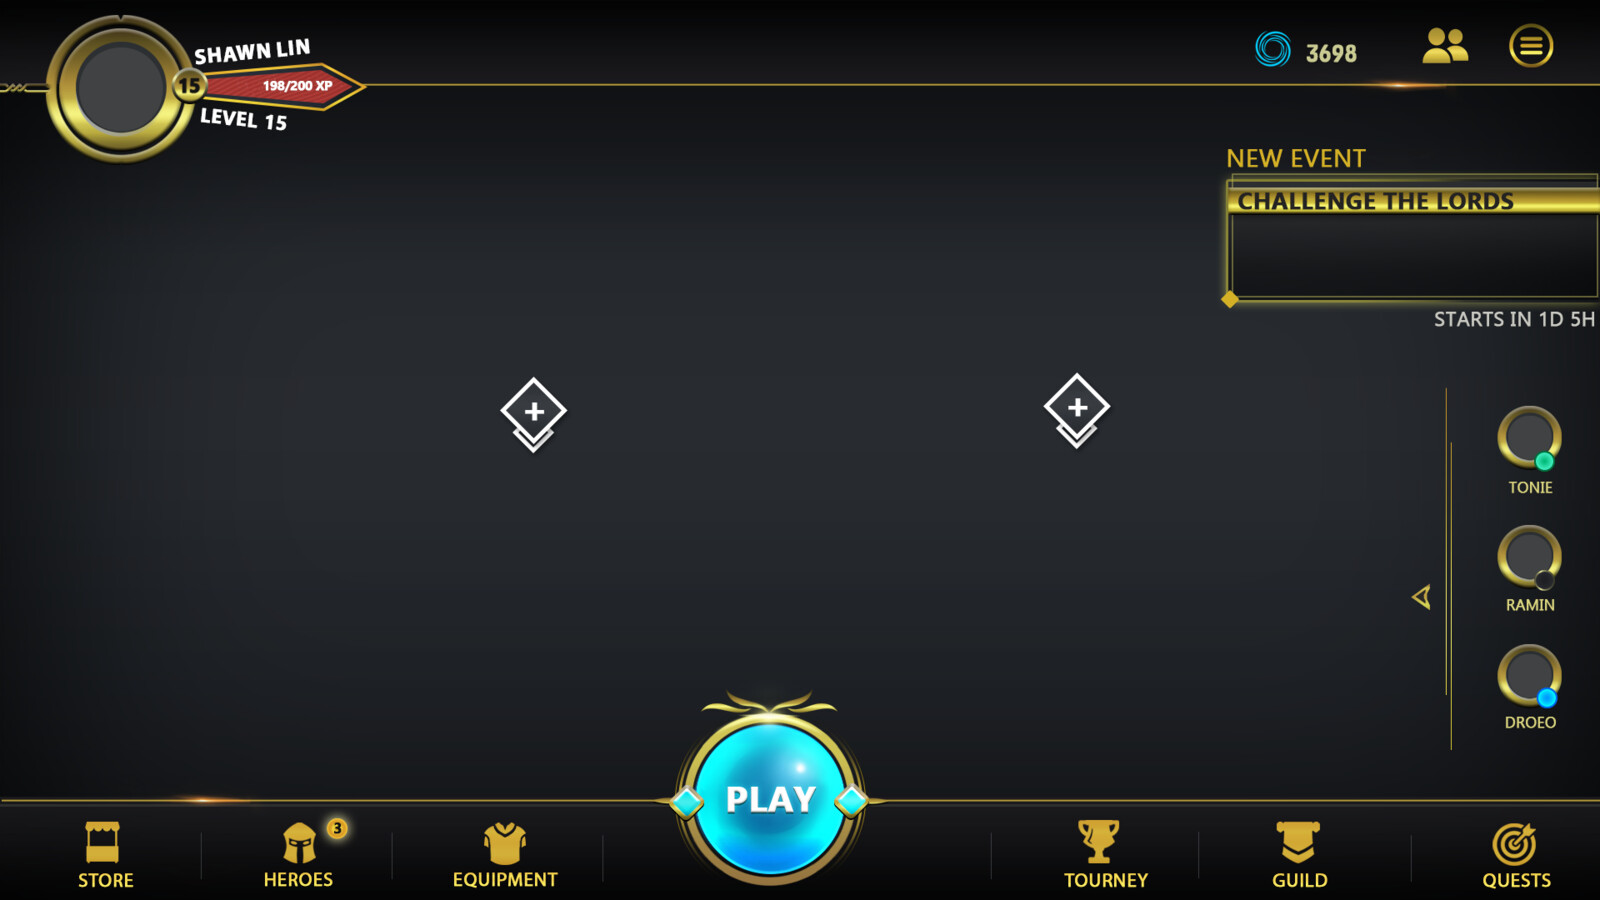 Gold Version of the Previous layout with a different style of Play Button where the two gems on the play button get filled only if the lobby is full or if only one person is in the lobby, then only 1 gem will be filled.